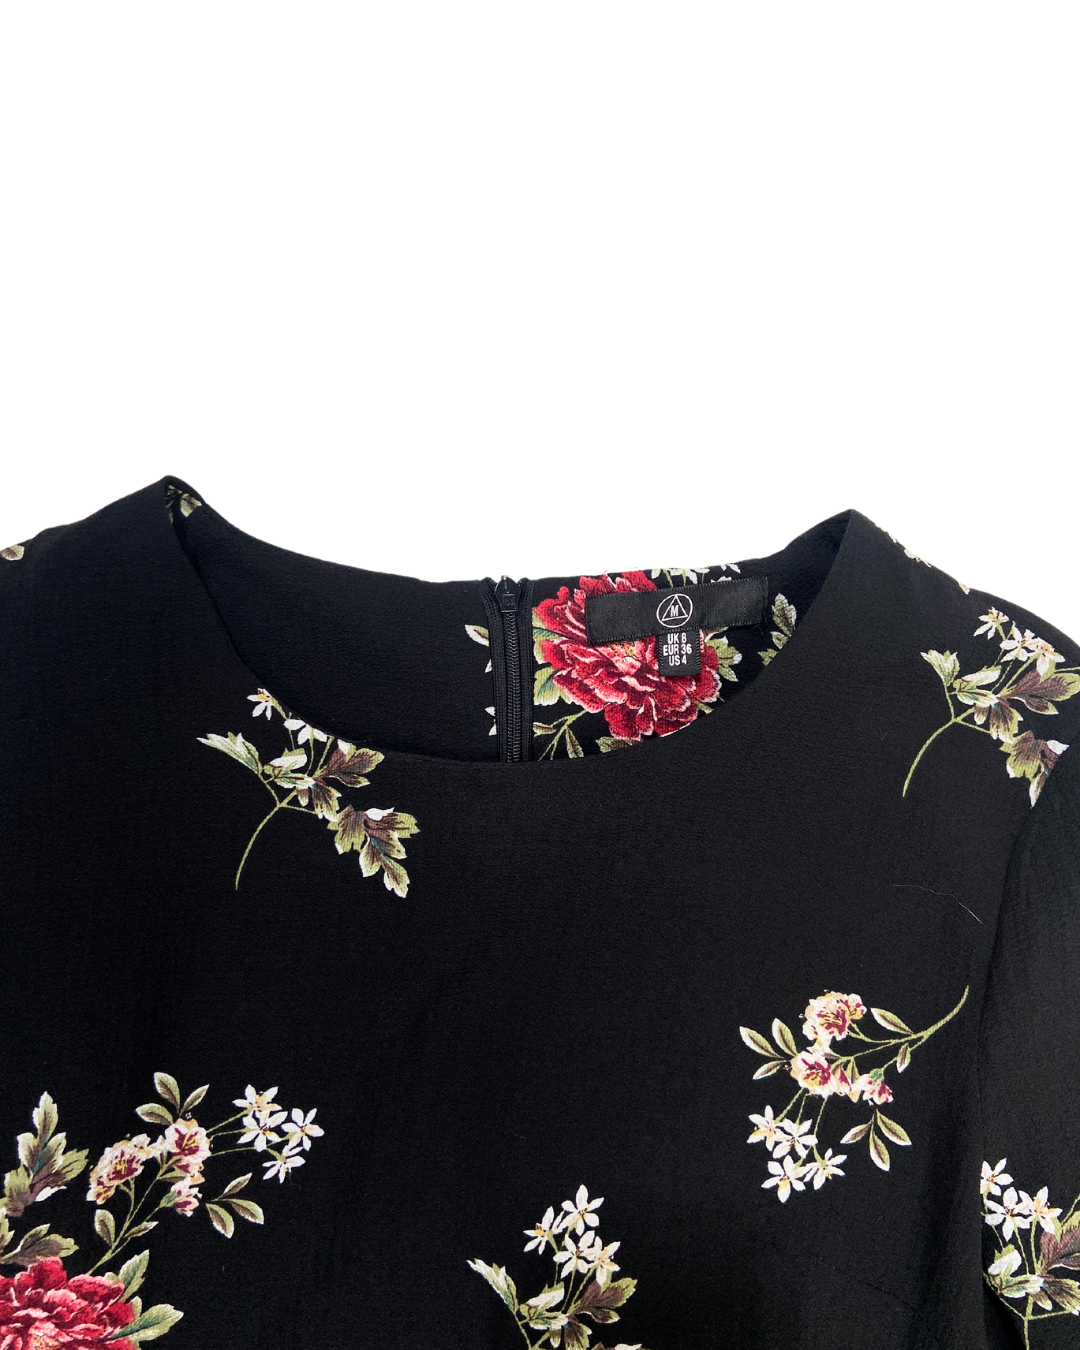 Missguided Floral Bell Sleeve Dress